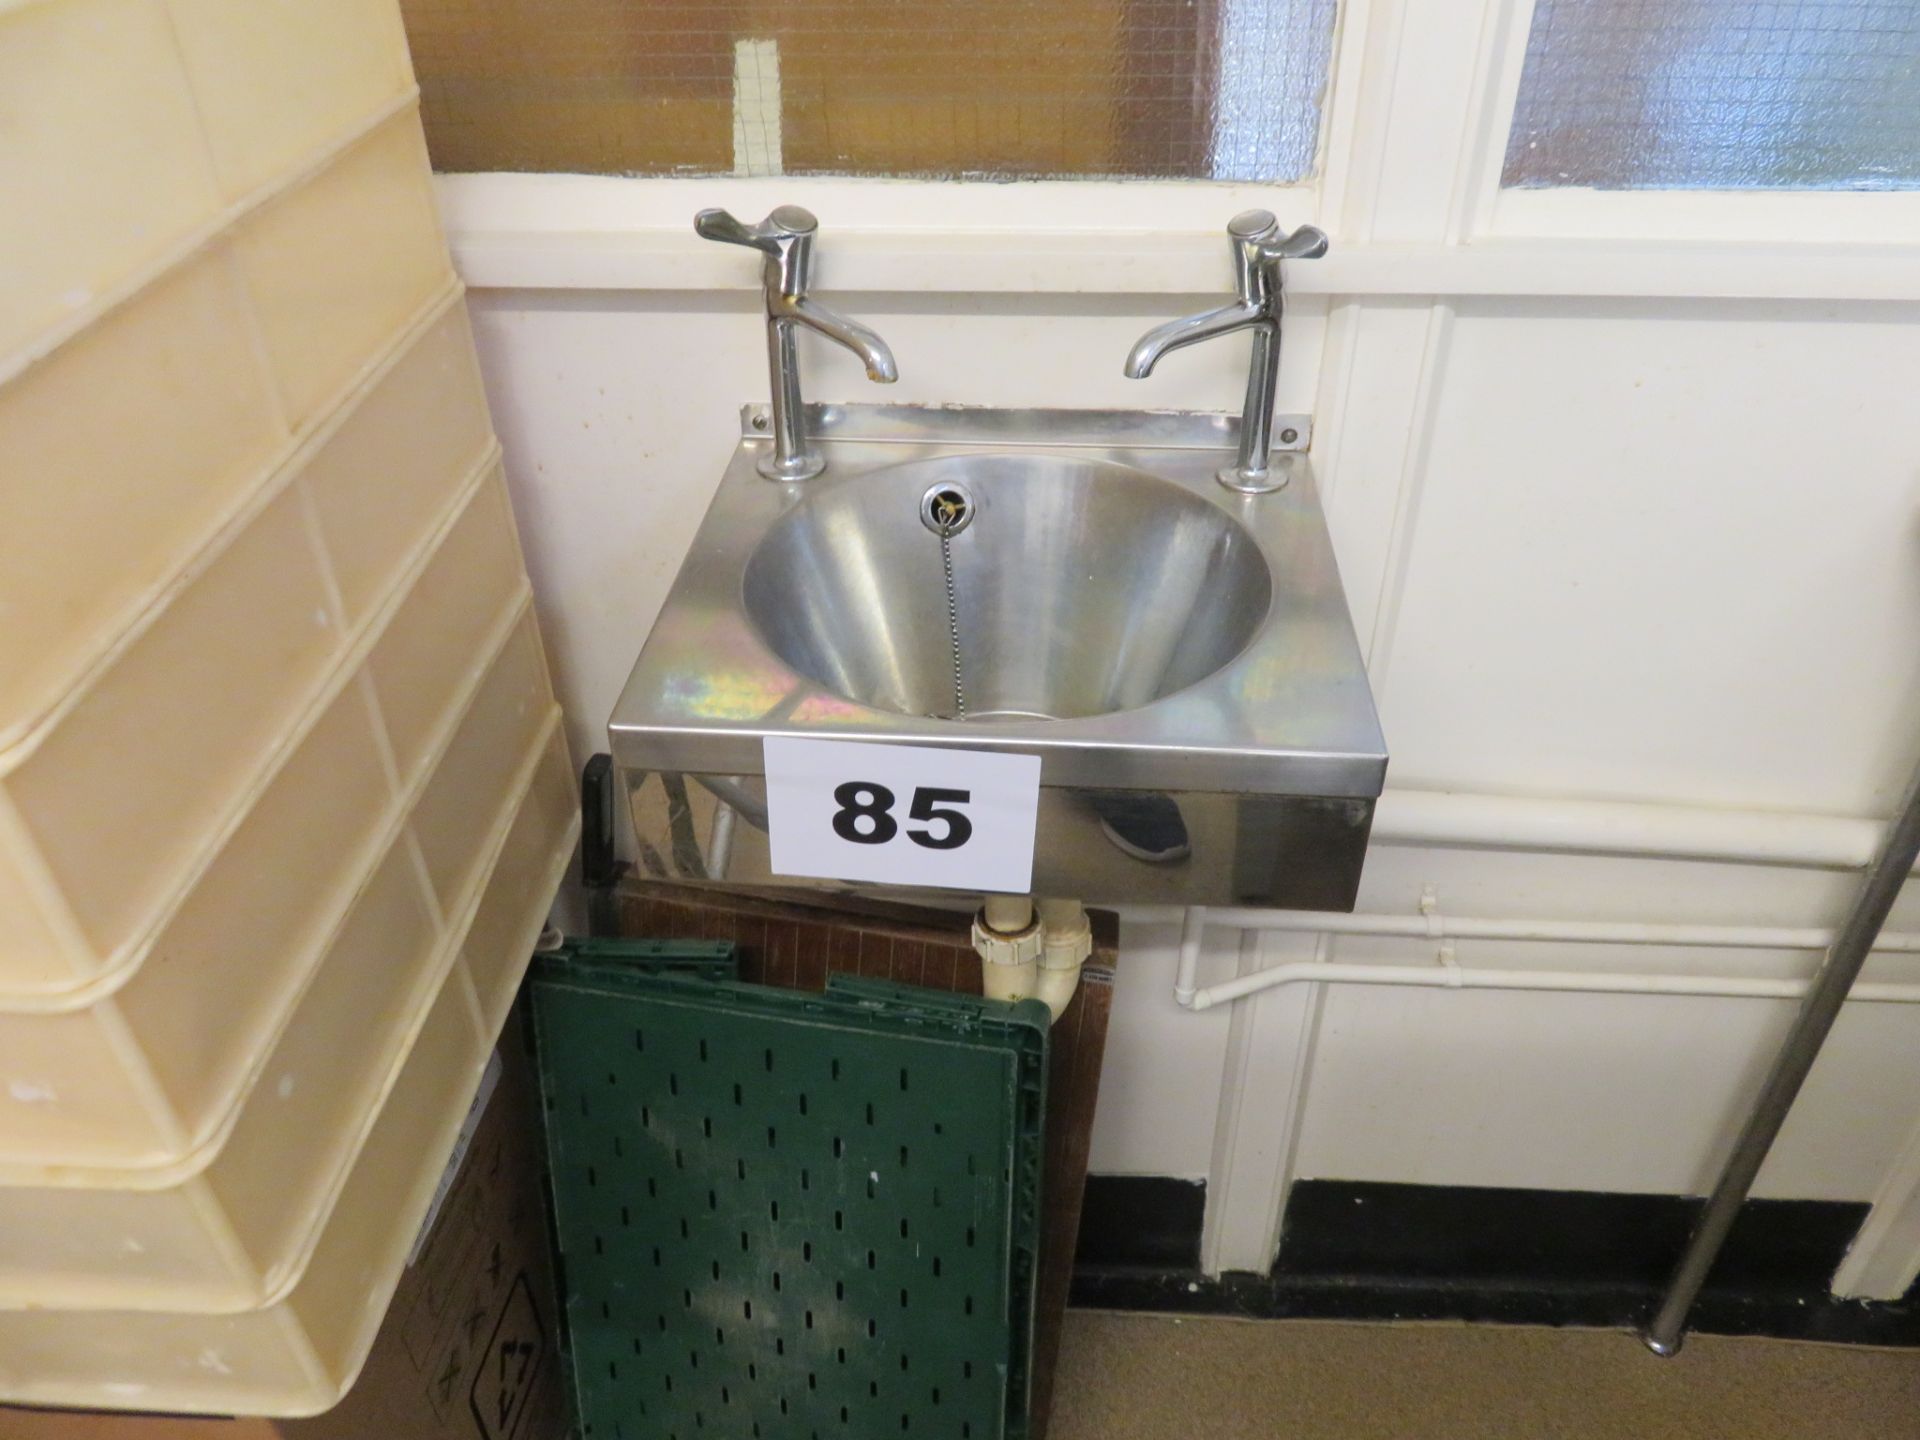 S/s Sink wall mounted. Lift out £25